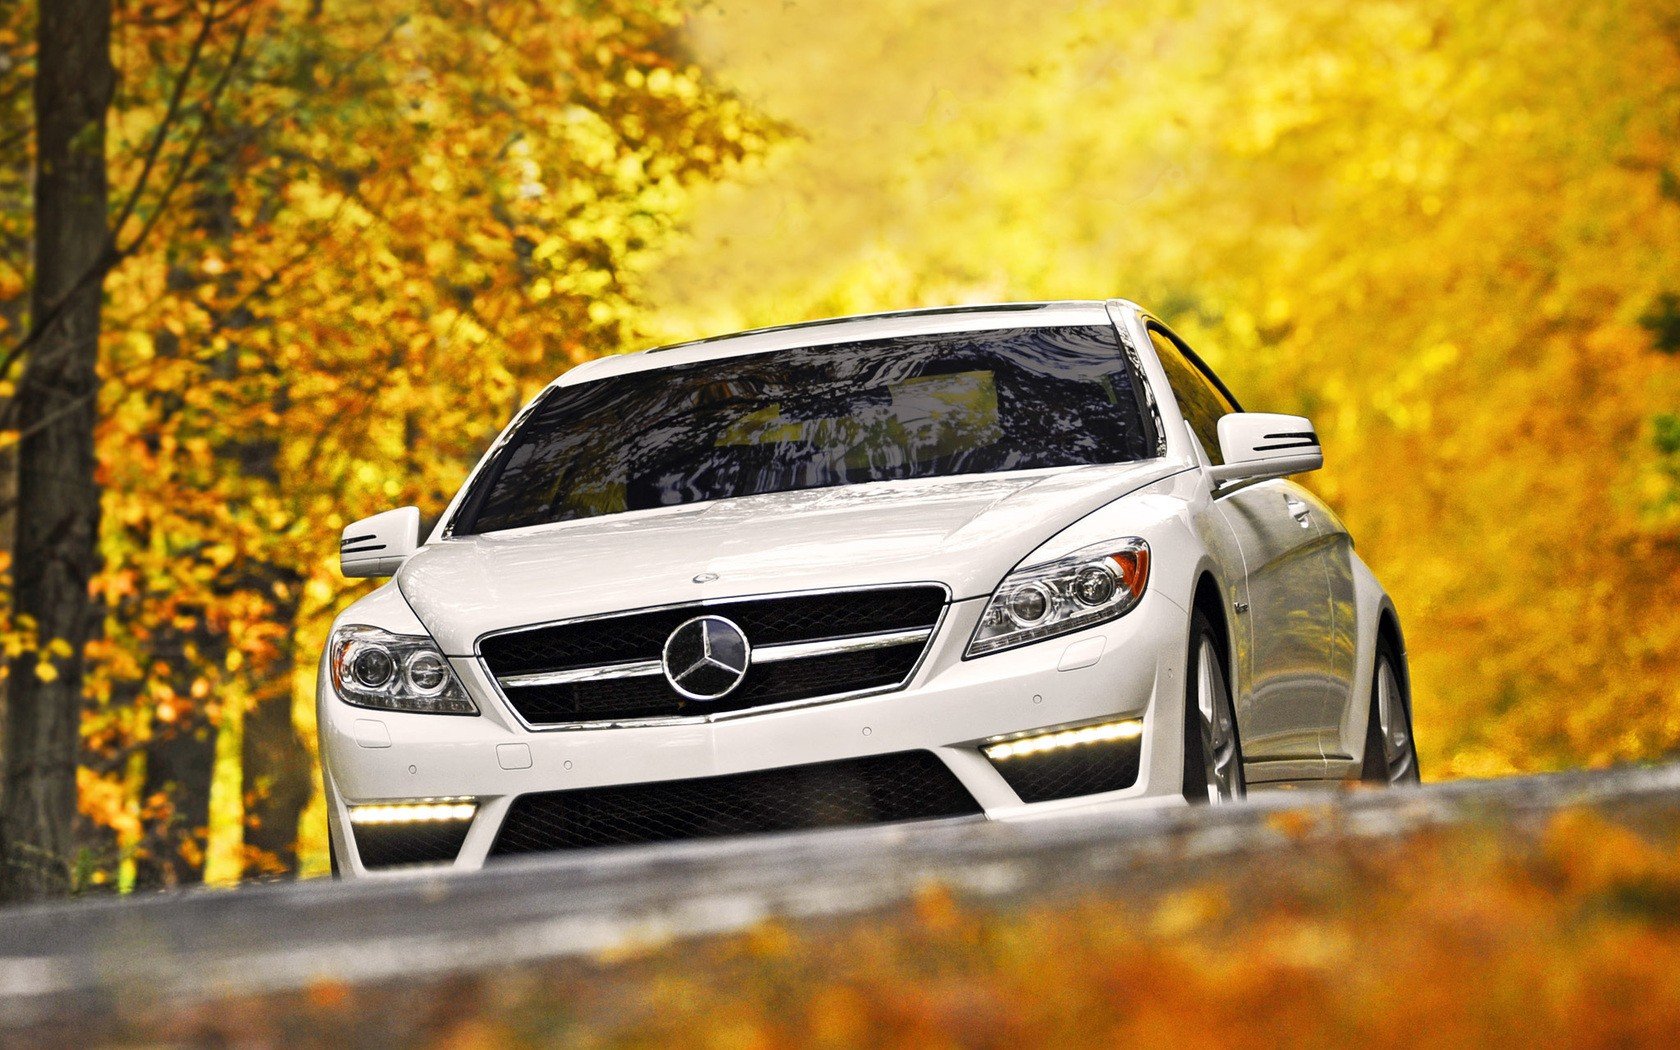 Benz Car Wallpapers Free Download